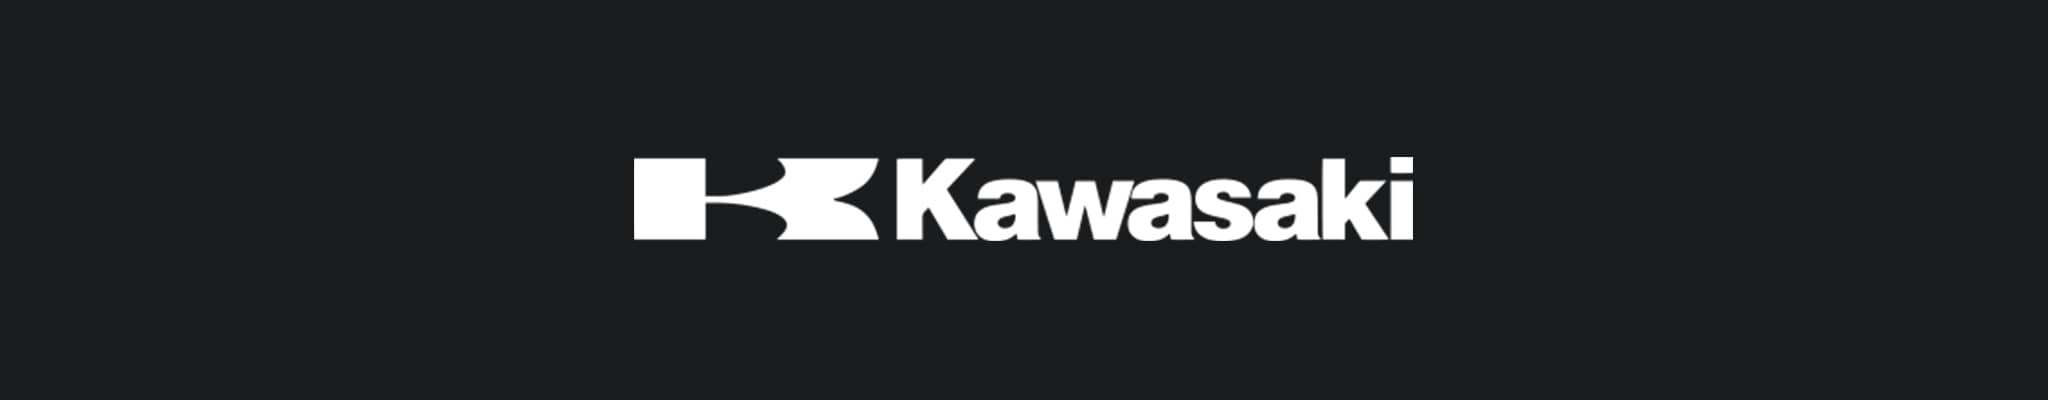 The Kawasaki logo in white on a black background, featured alongside the text on the Perfex website.